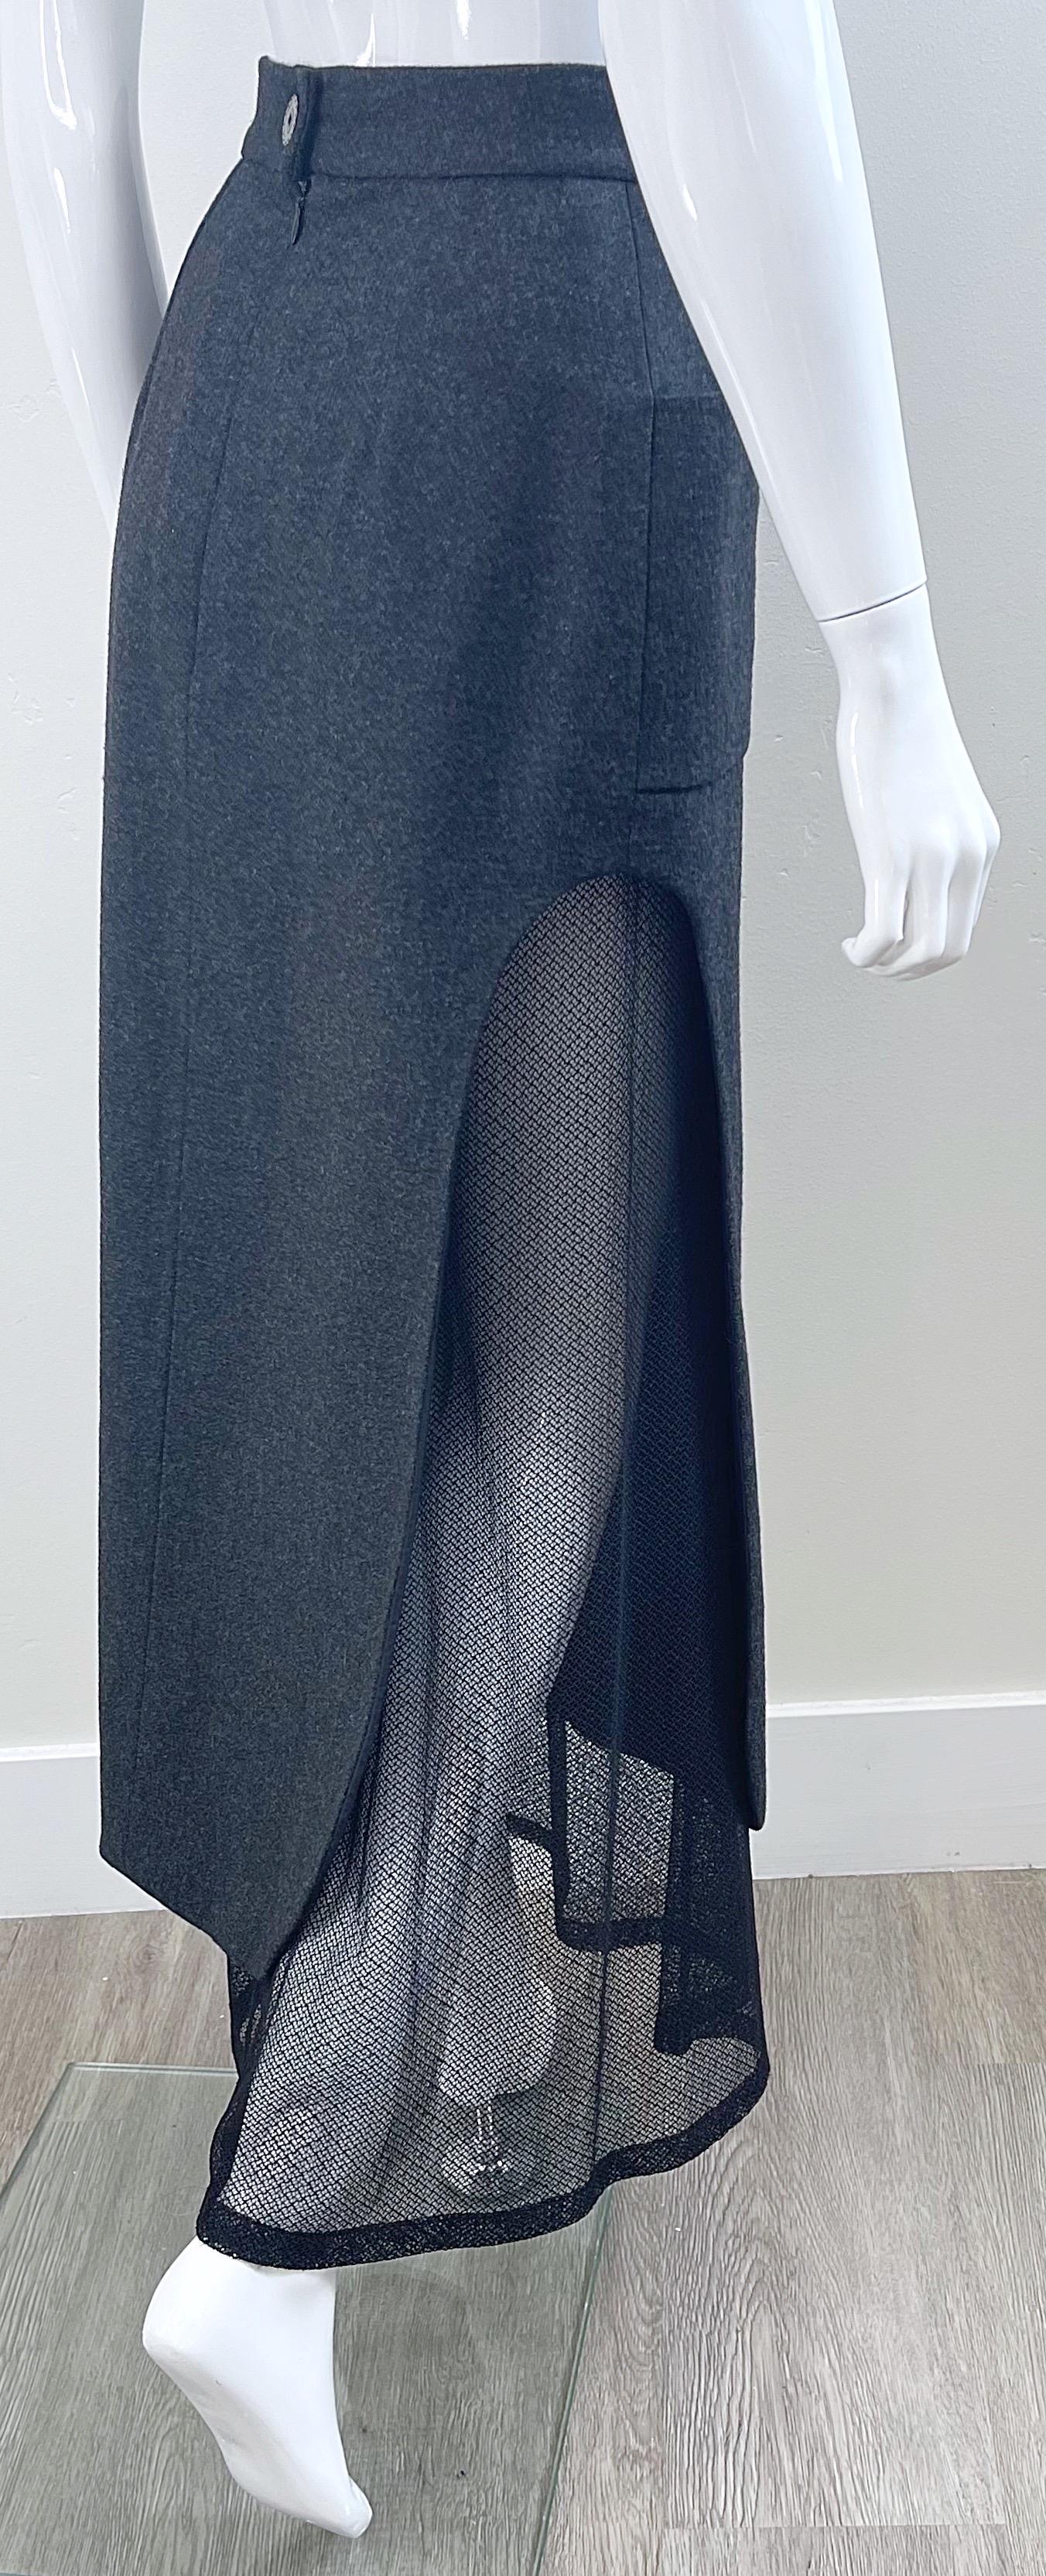 Karl Lagerfeld 1980s Grey Wool + Black Lace Vintage 80s Mini Maxi Skirt For Sale 2